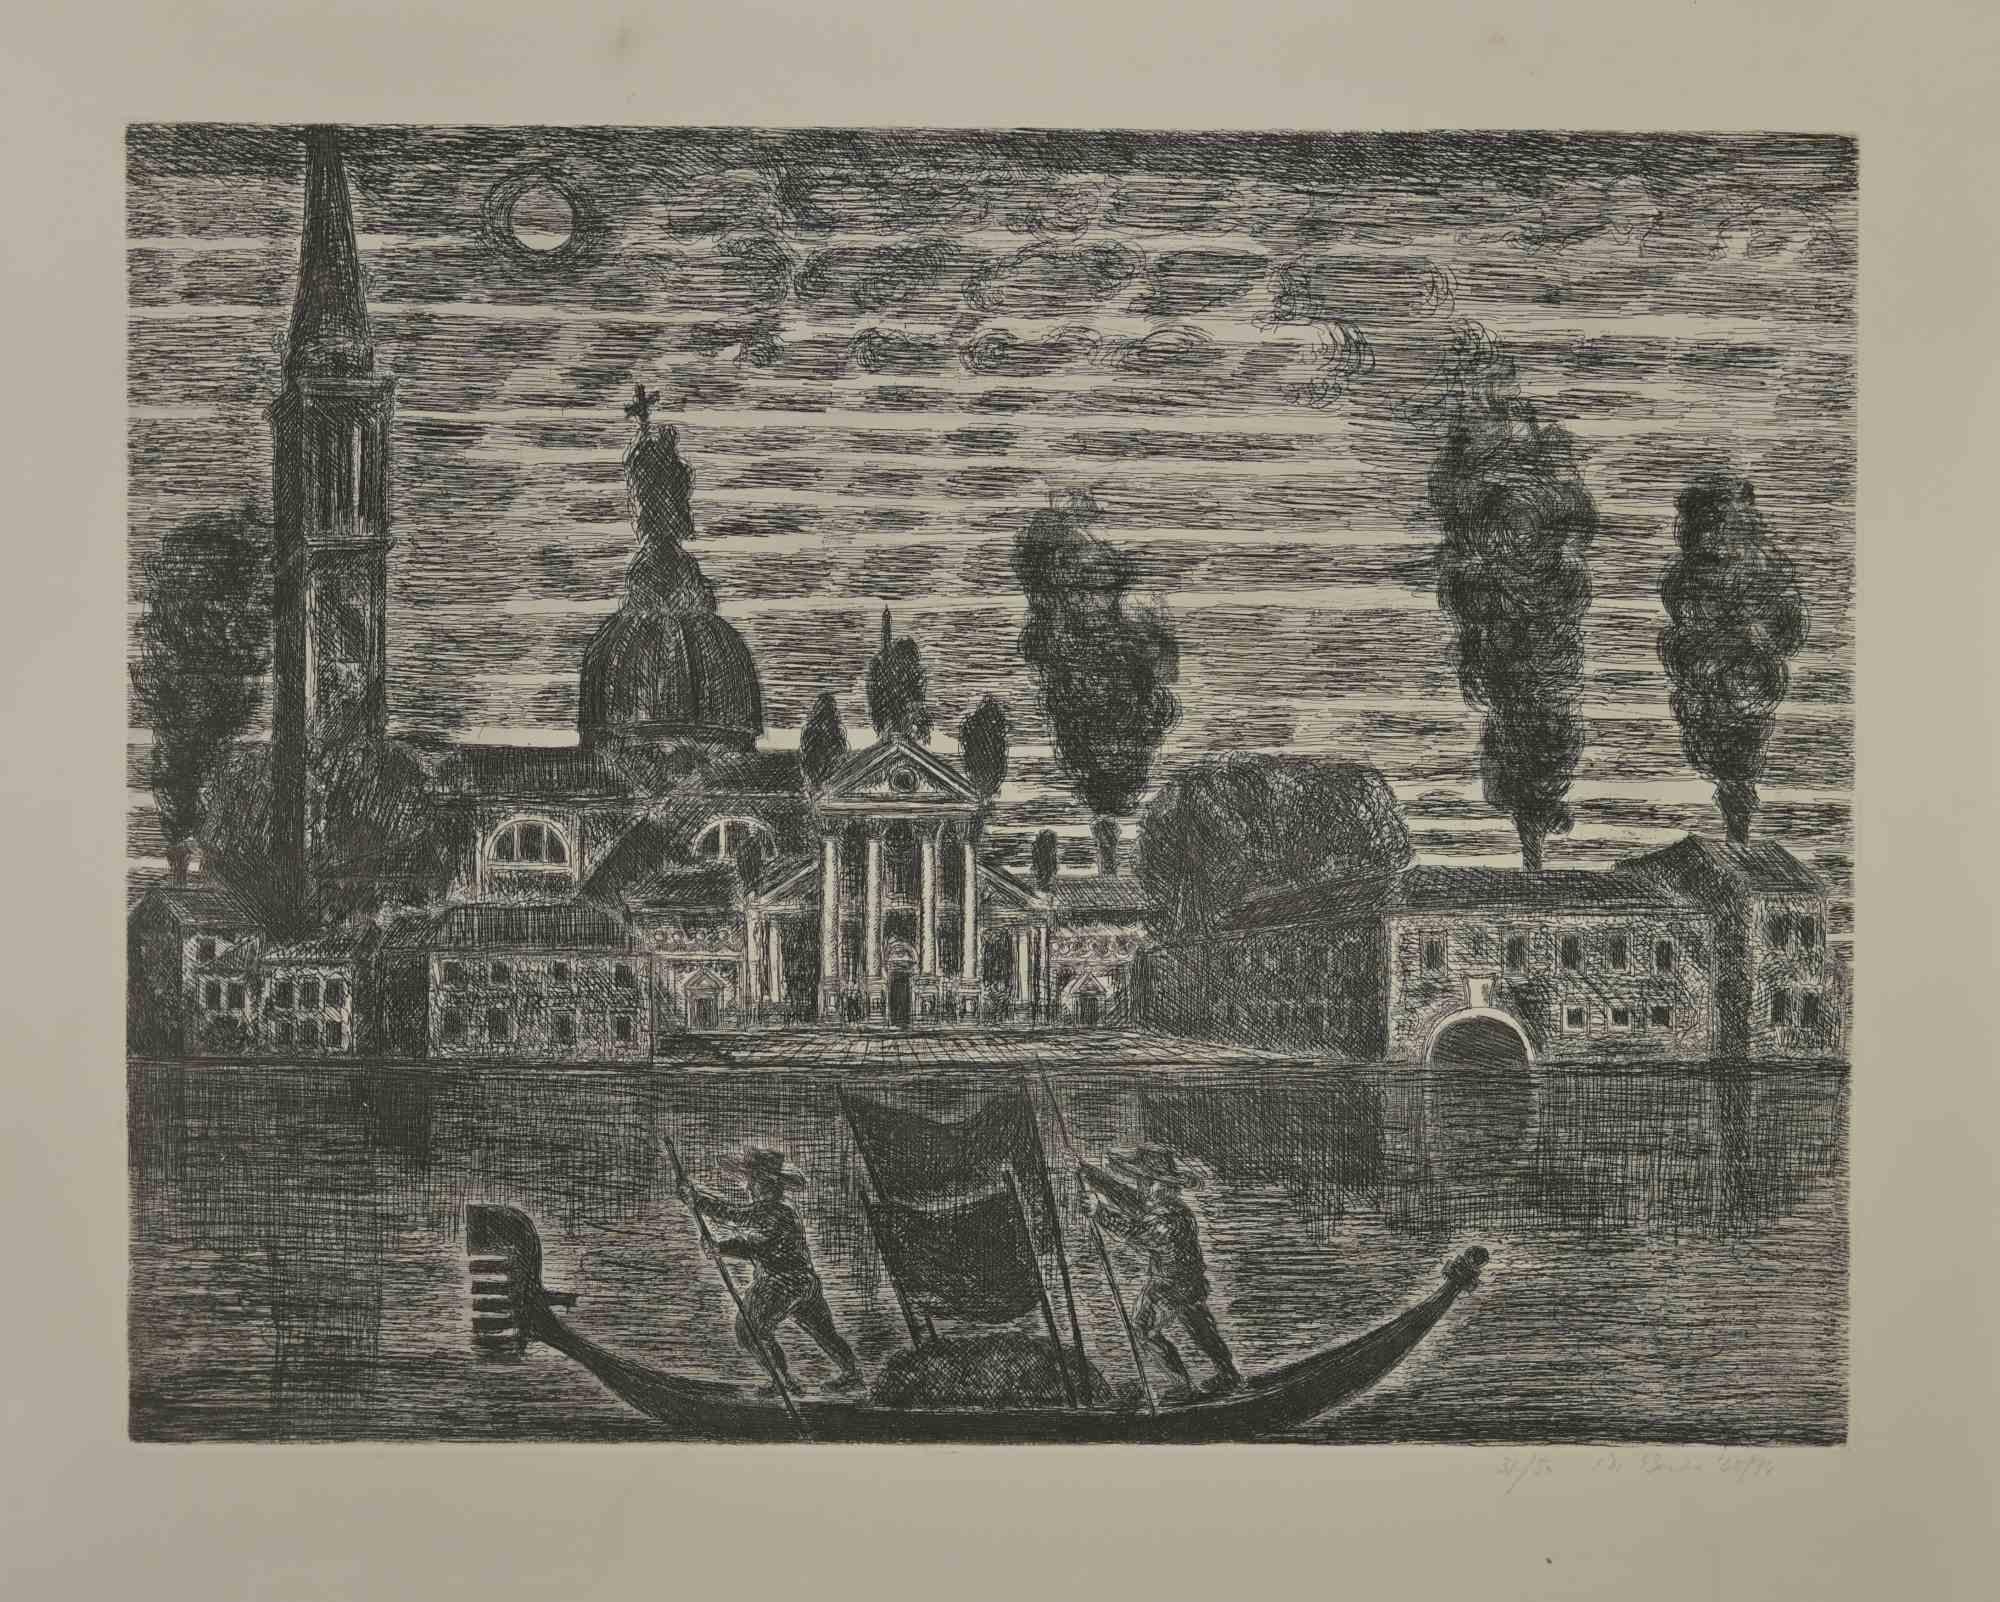 Gondoliers in Venice is anetching realized by Gianpaolo Berto in 1974.

60 X 75 cm , no frame.

Edition 31/50. Numbered and firmed by the artist in the lower margin.

Good conditions.

Gianpaolo Berto (1940) was born and raised in the circumscribed